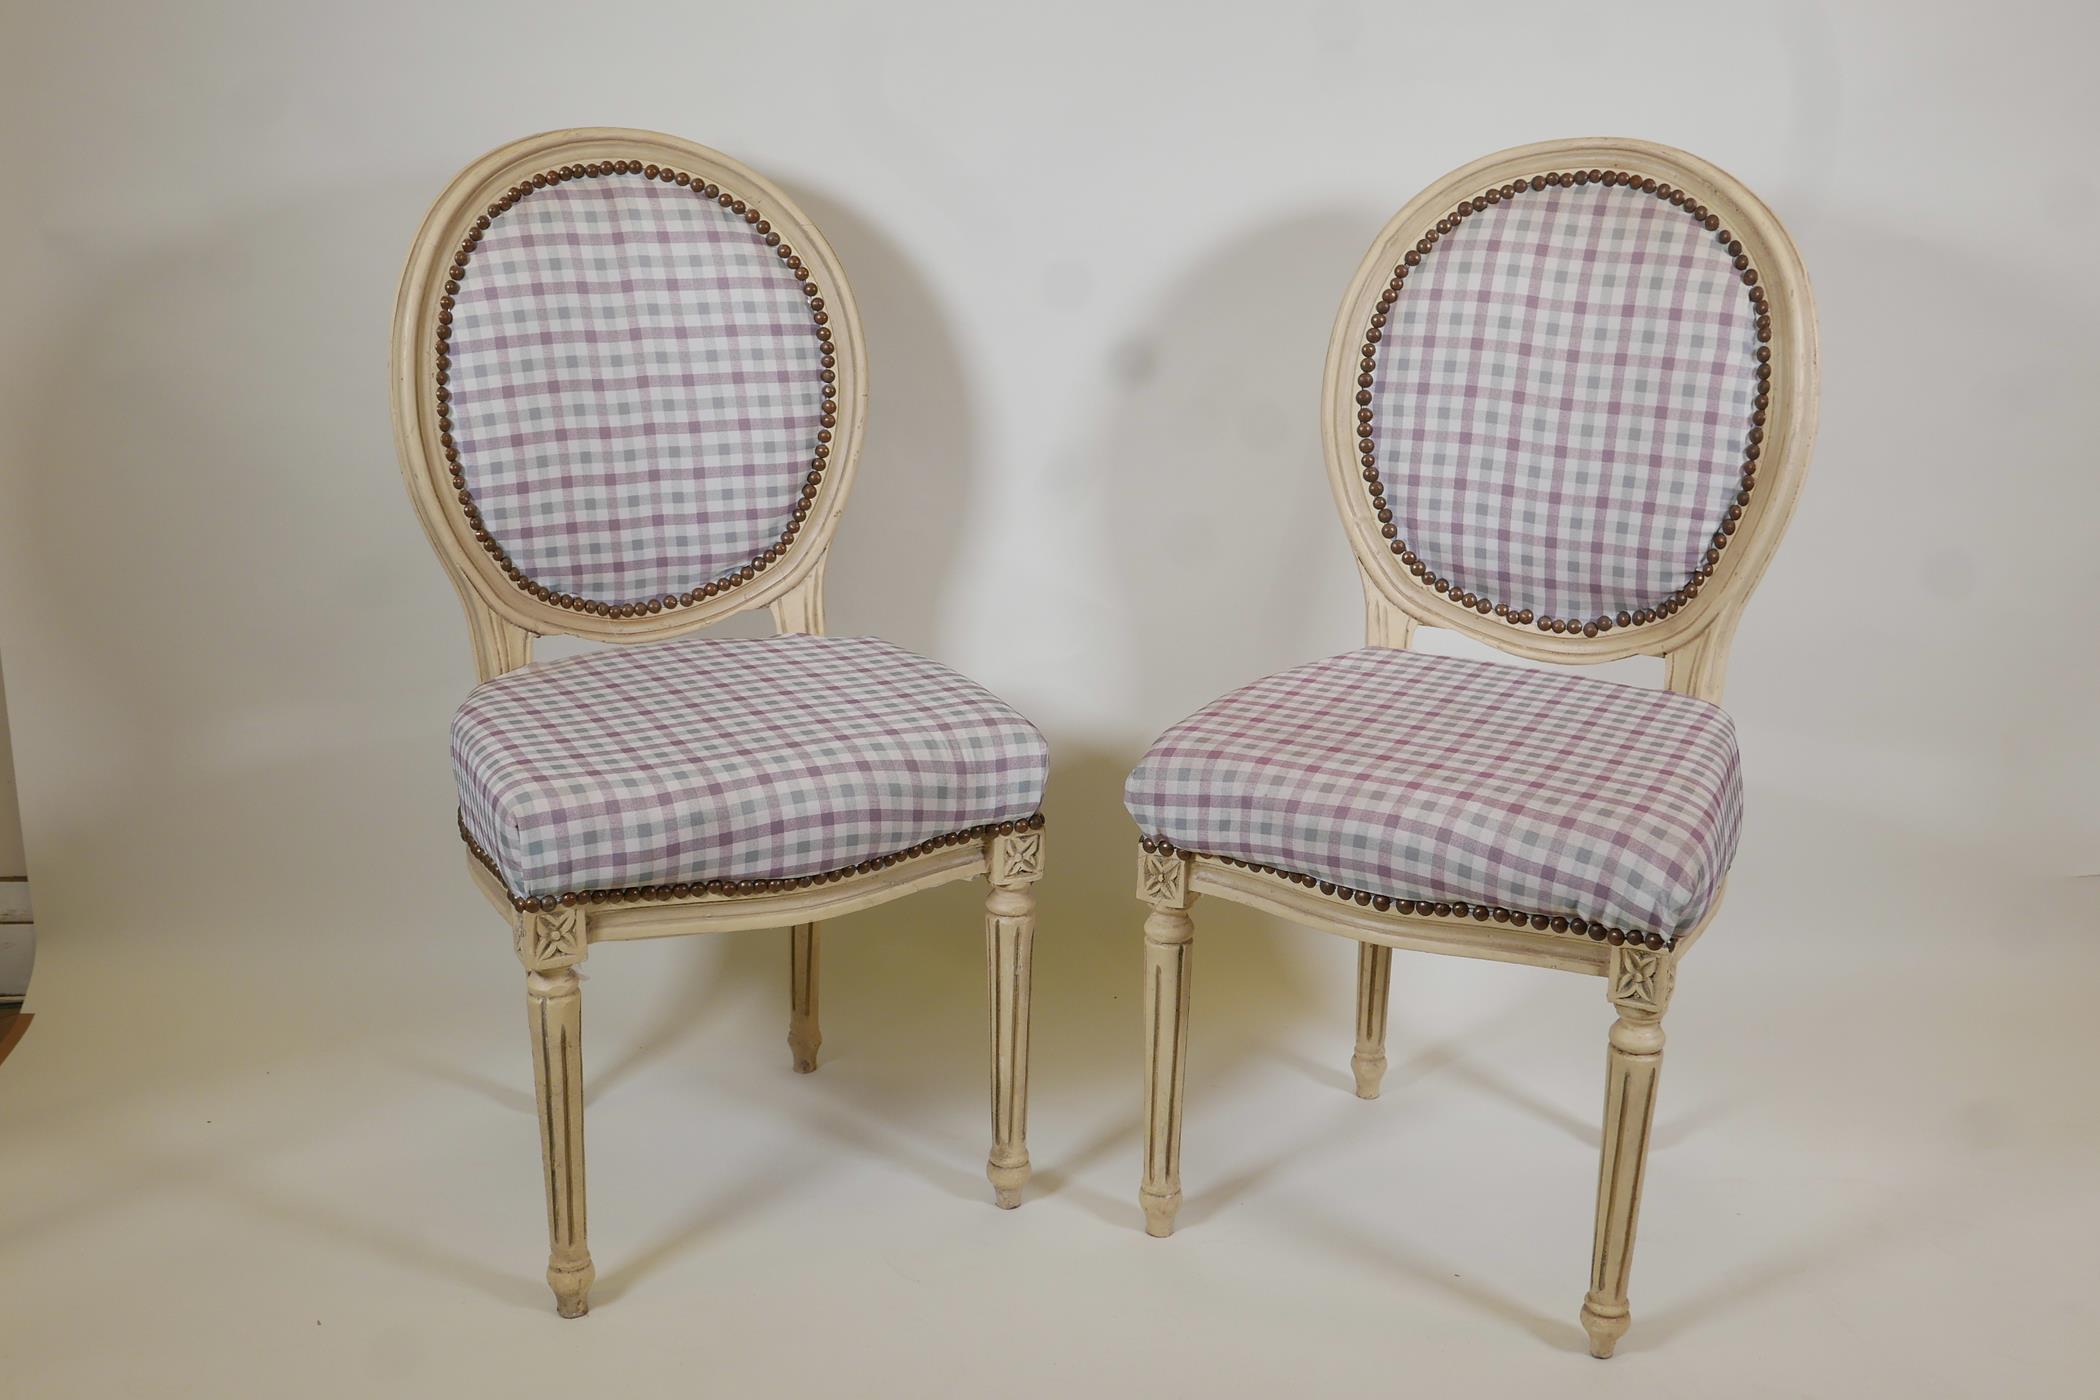 A pair of Louis style side chairs